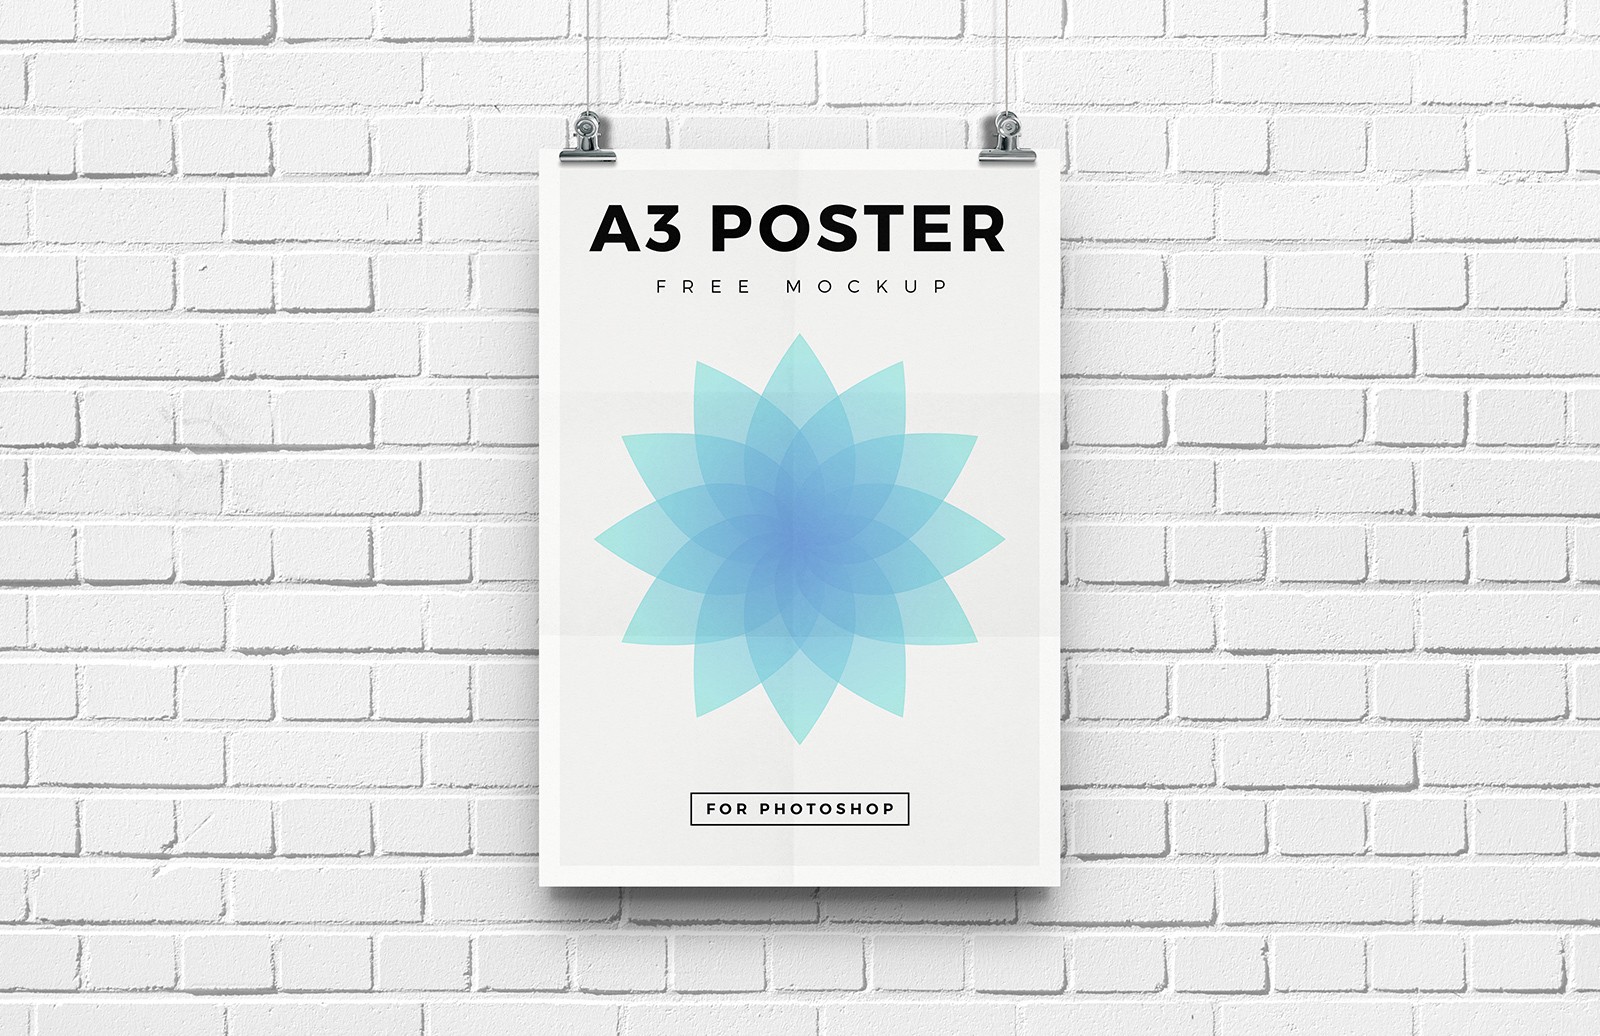 Download High Resolution A3 Poster Mockup - Free Download